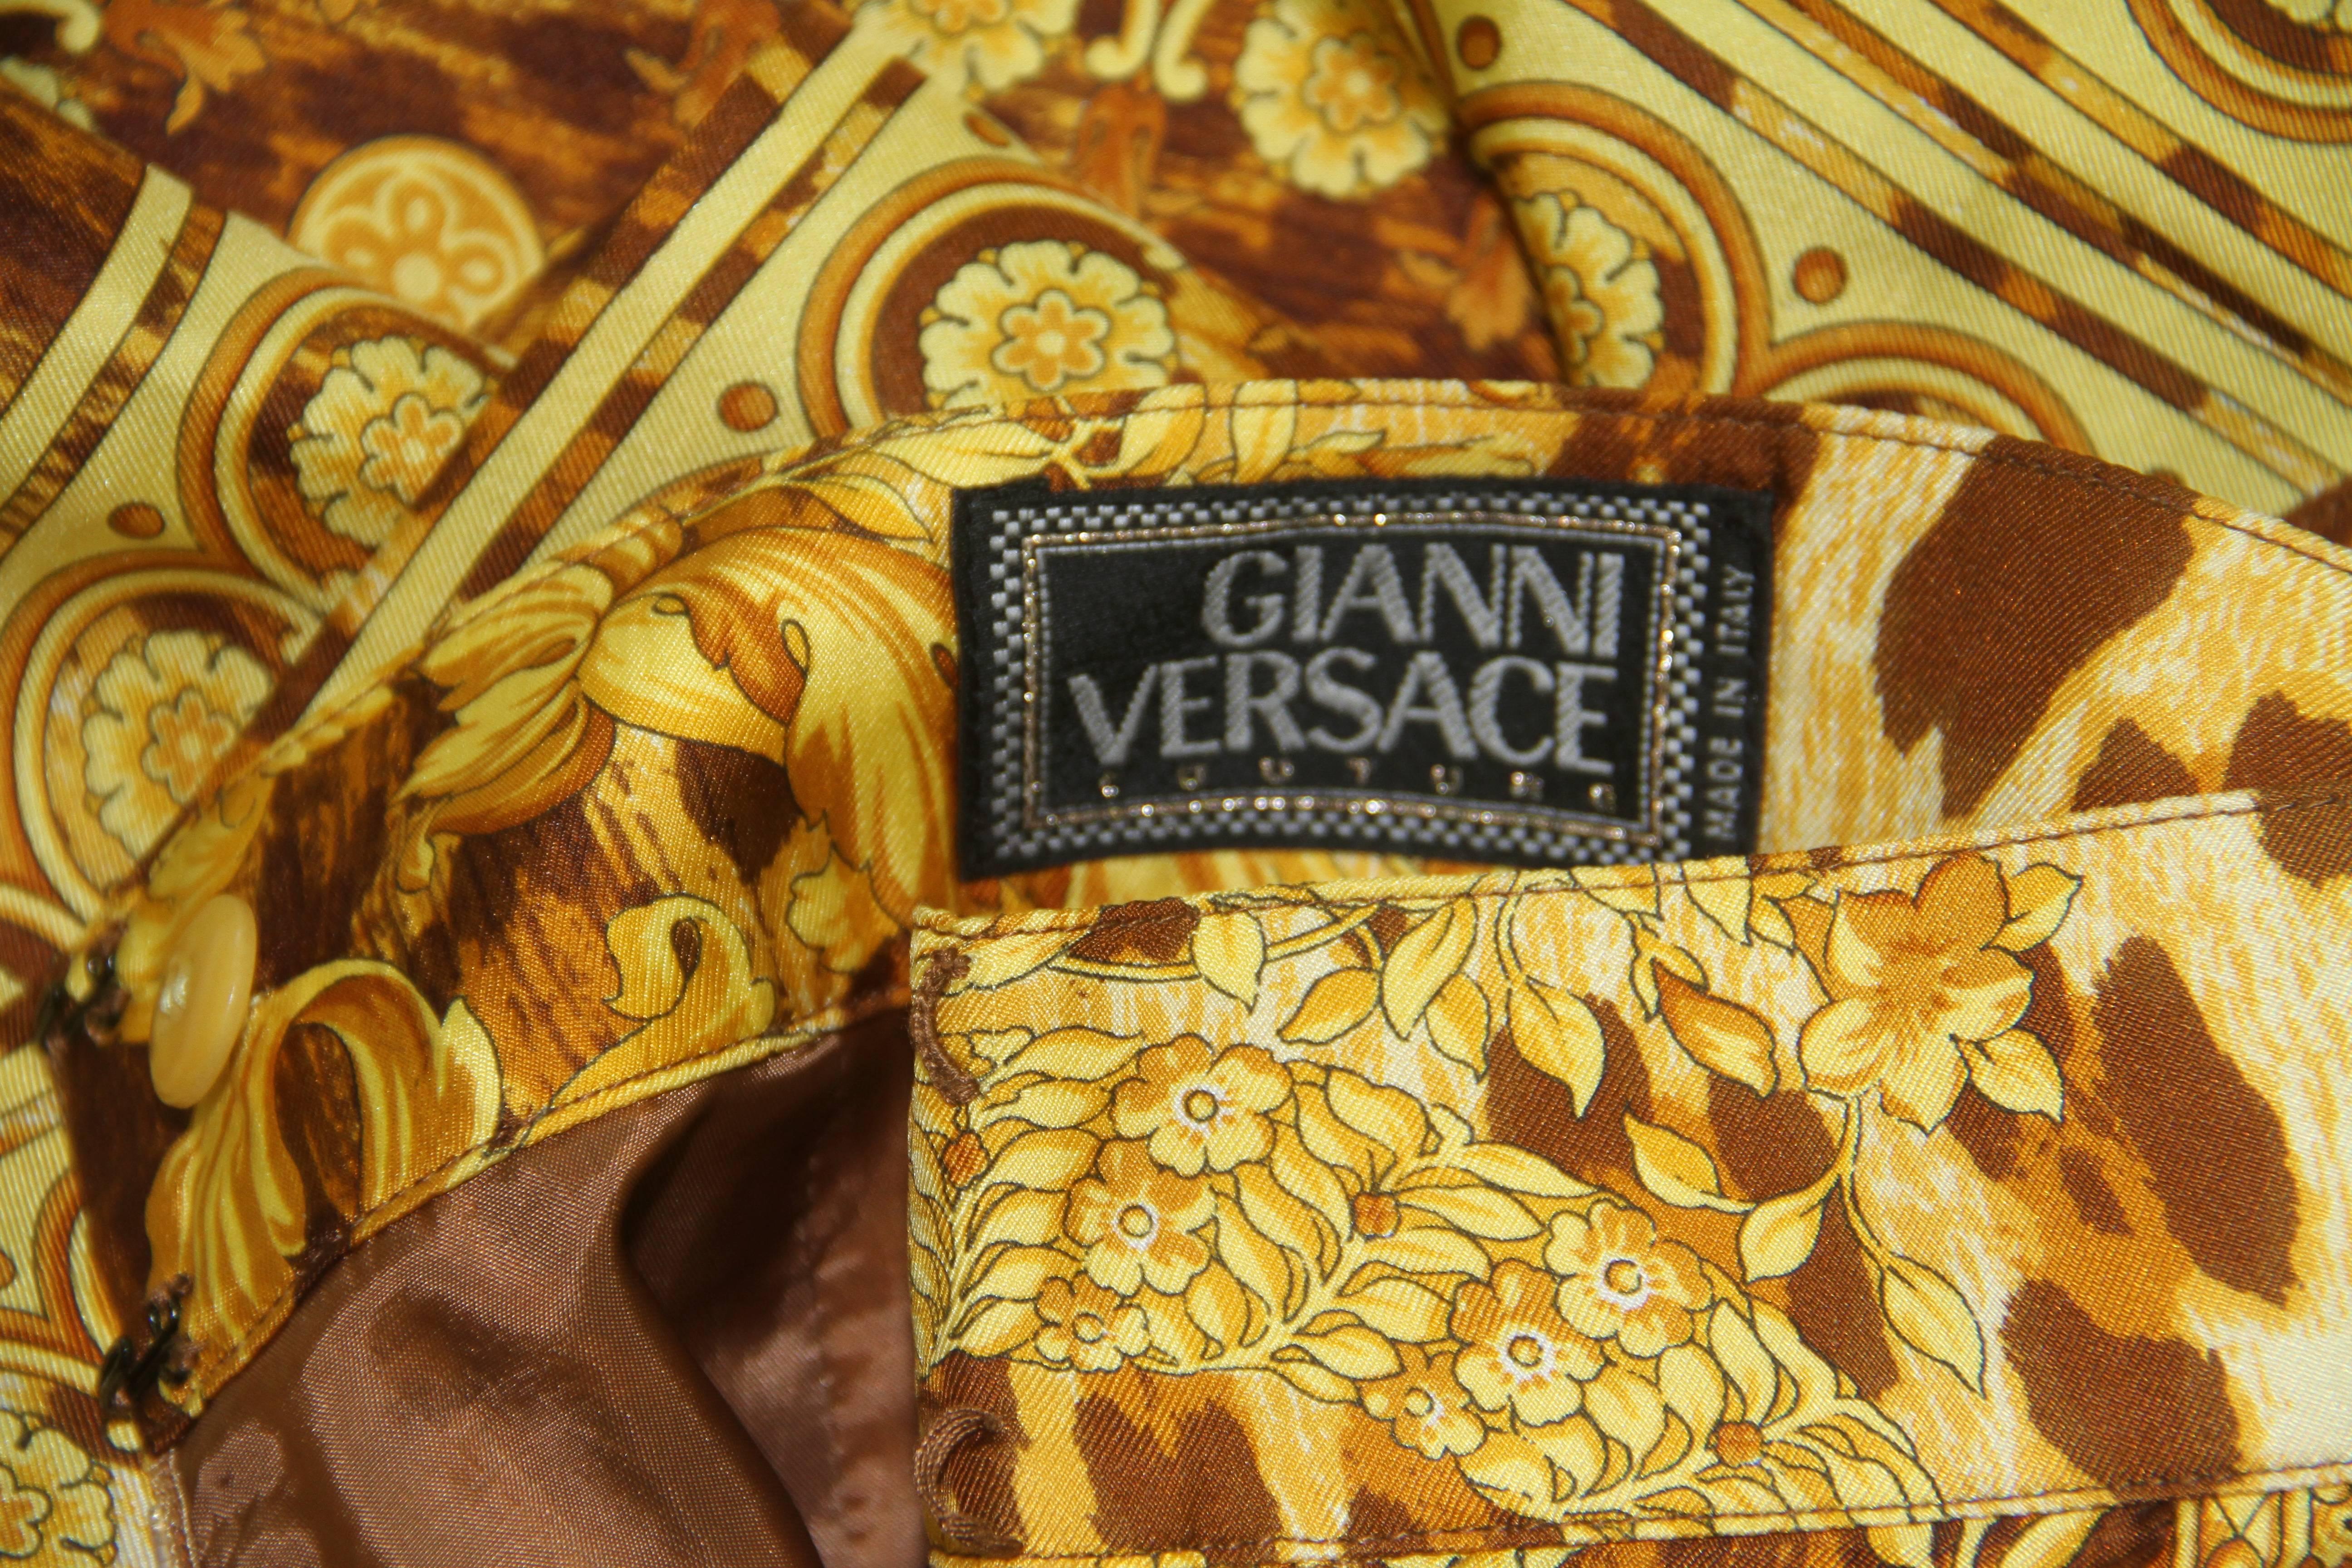 Gianni Versace wild Baroque silk printed skirt from the Spring 1992 collection.

Unmarked, however, sizing is equivalent to an Italian size 38.

Manufacturer - Alias S.p.a.

Fabric content - 100% silk